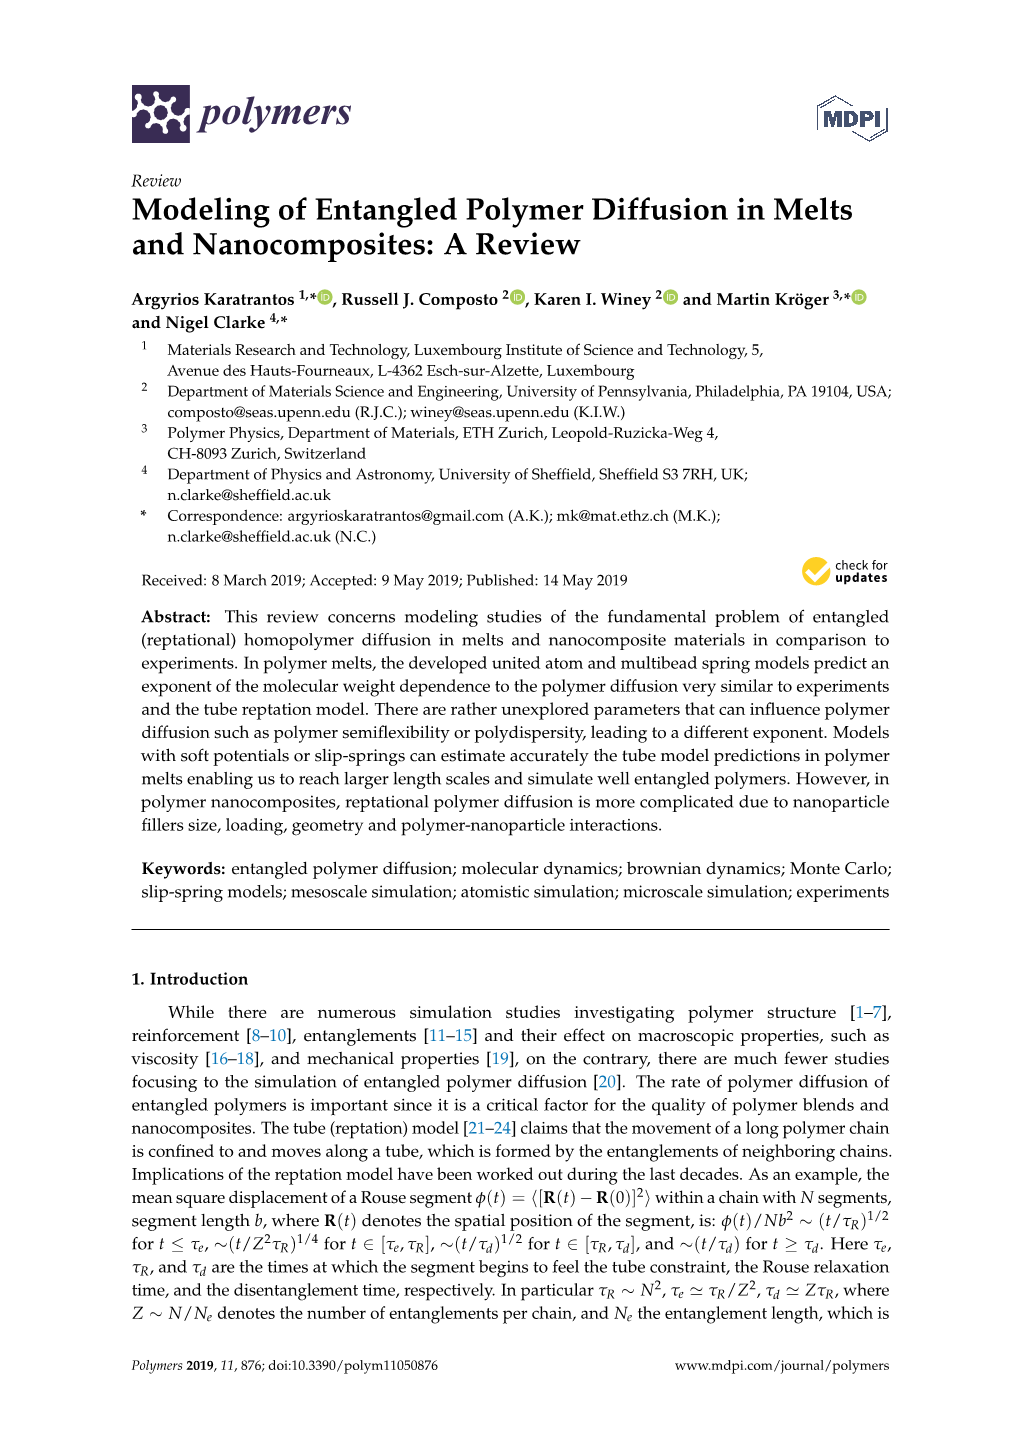 Modeling of Entangled Polymer Diffusion in Melts and Nanocomposites: a Review